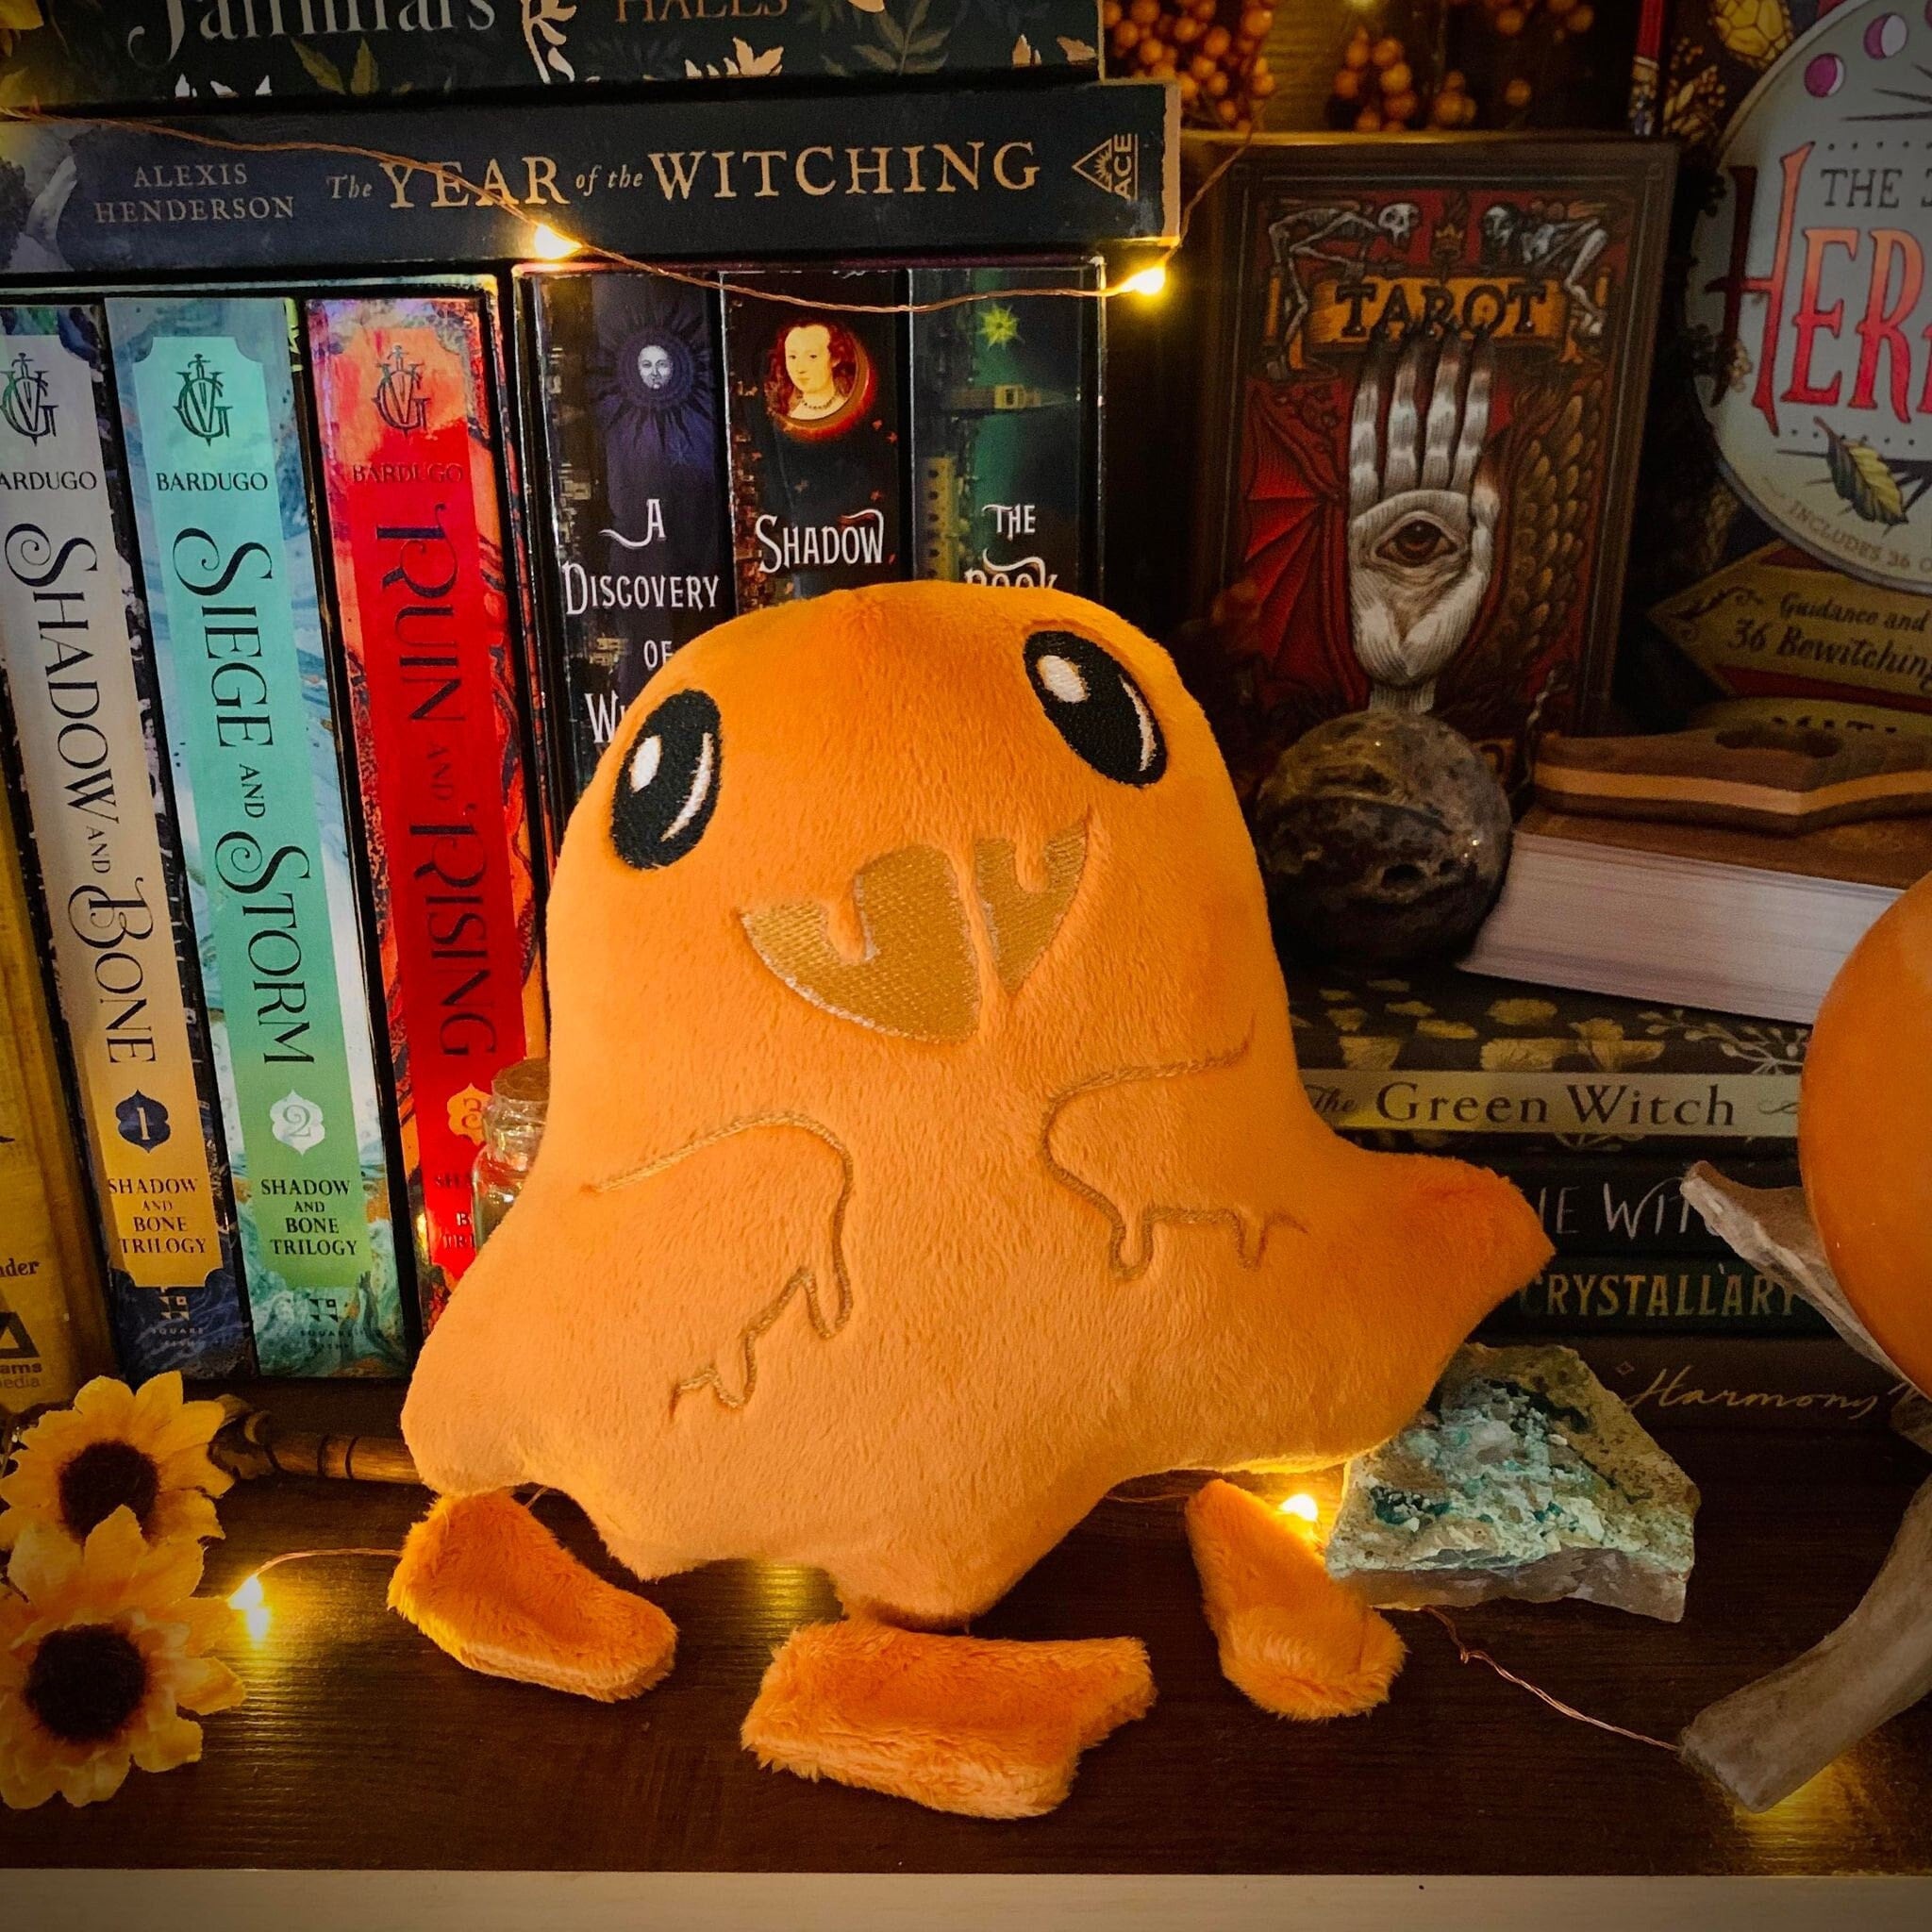 SCP-1471-A / Malo in Orange Suit Minky Plush Toy -  Norway